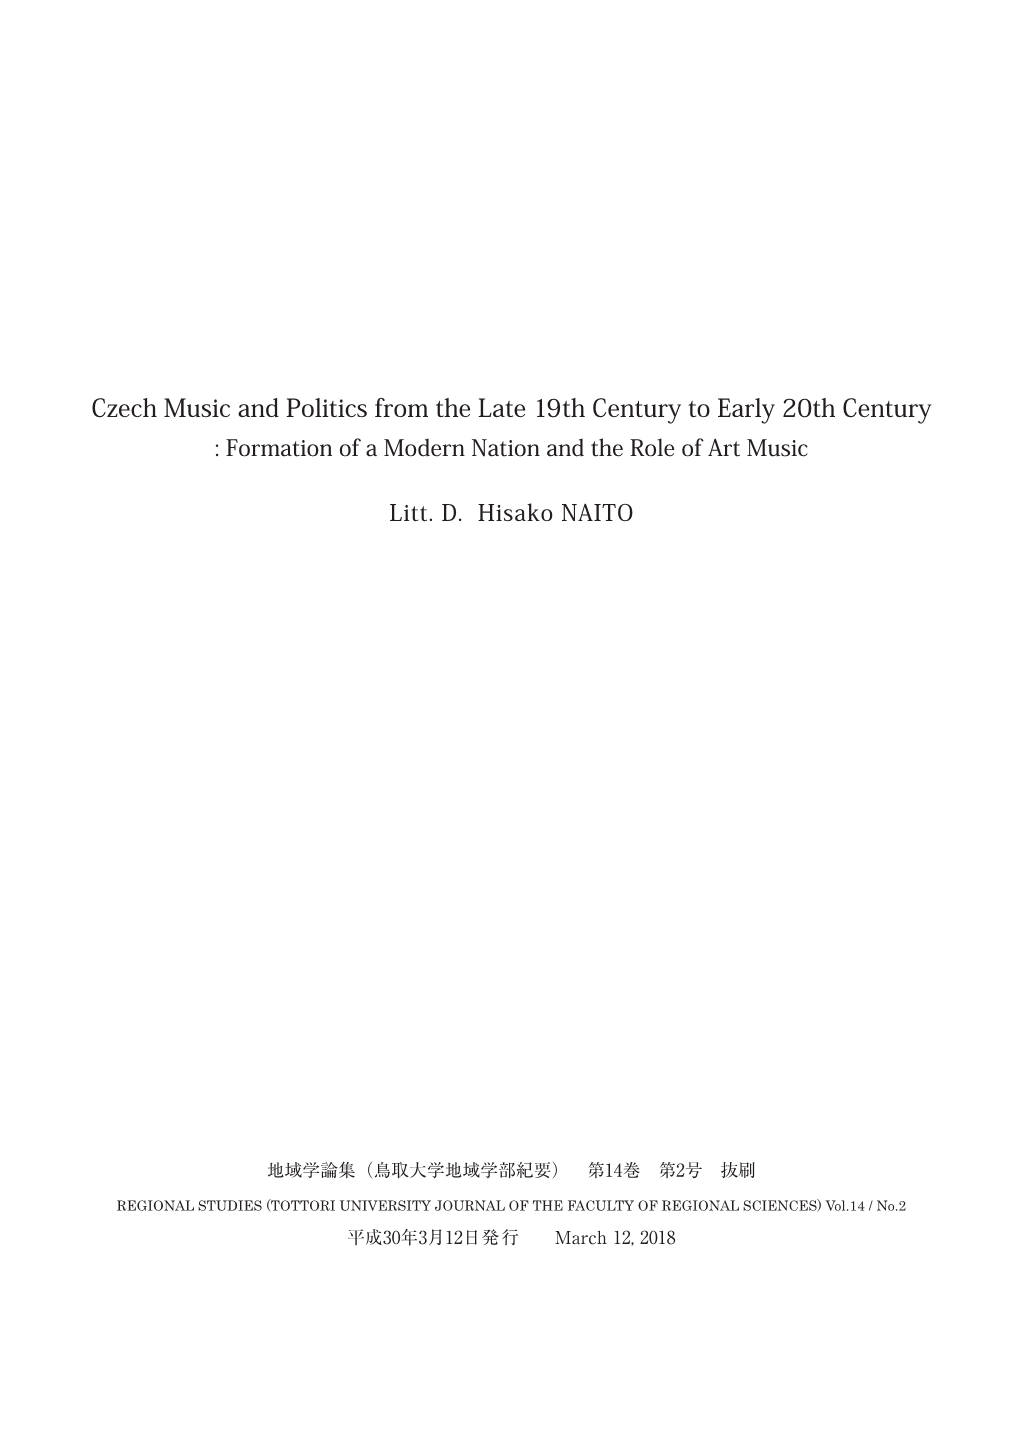 Czech Music and Politics from the Late 19Th Century to Early 20Th Century : Formation of a Modern Nation and the Role of Art Music